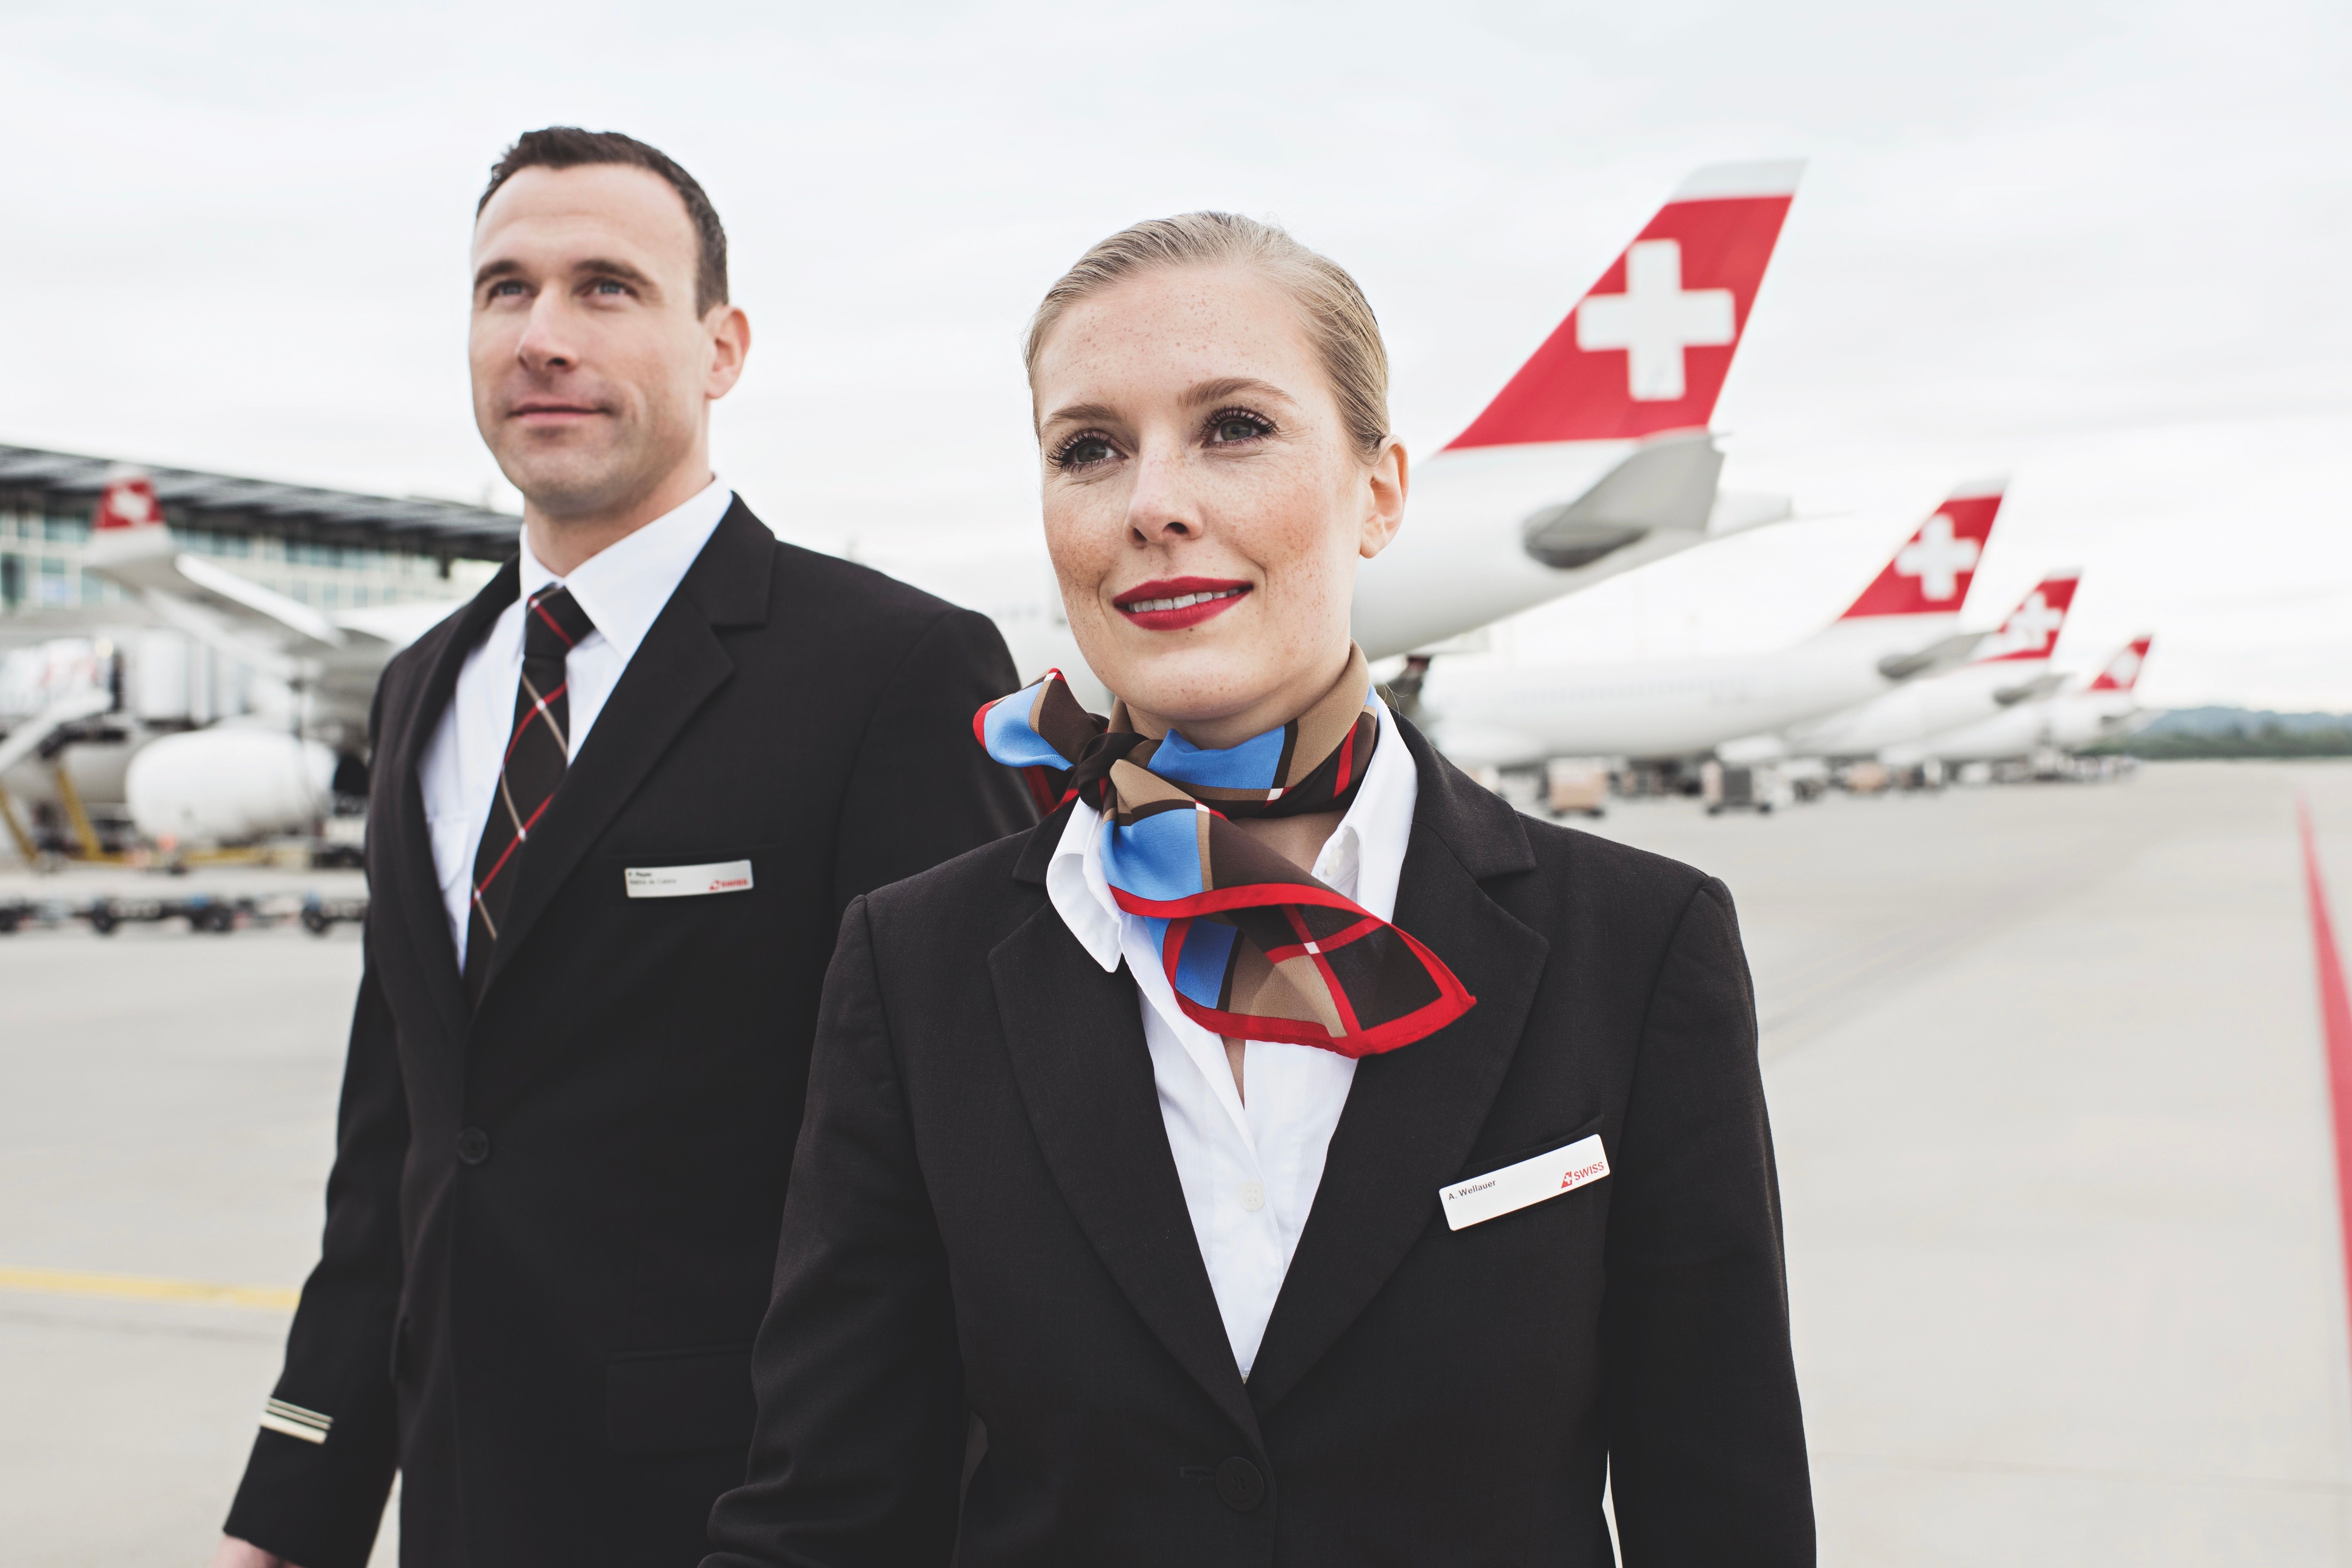 Two SWISS cabin crew members standing on the airport apron in front of several large aircraft.